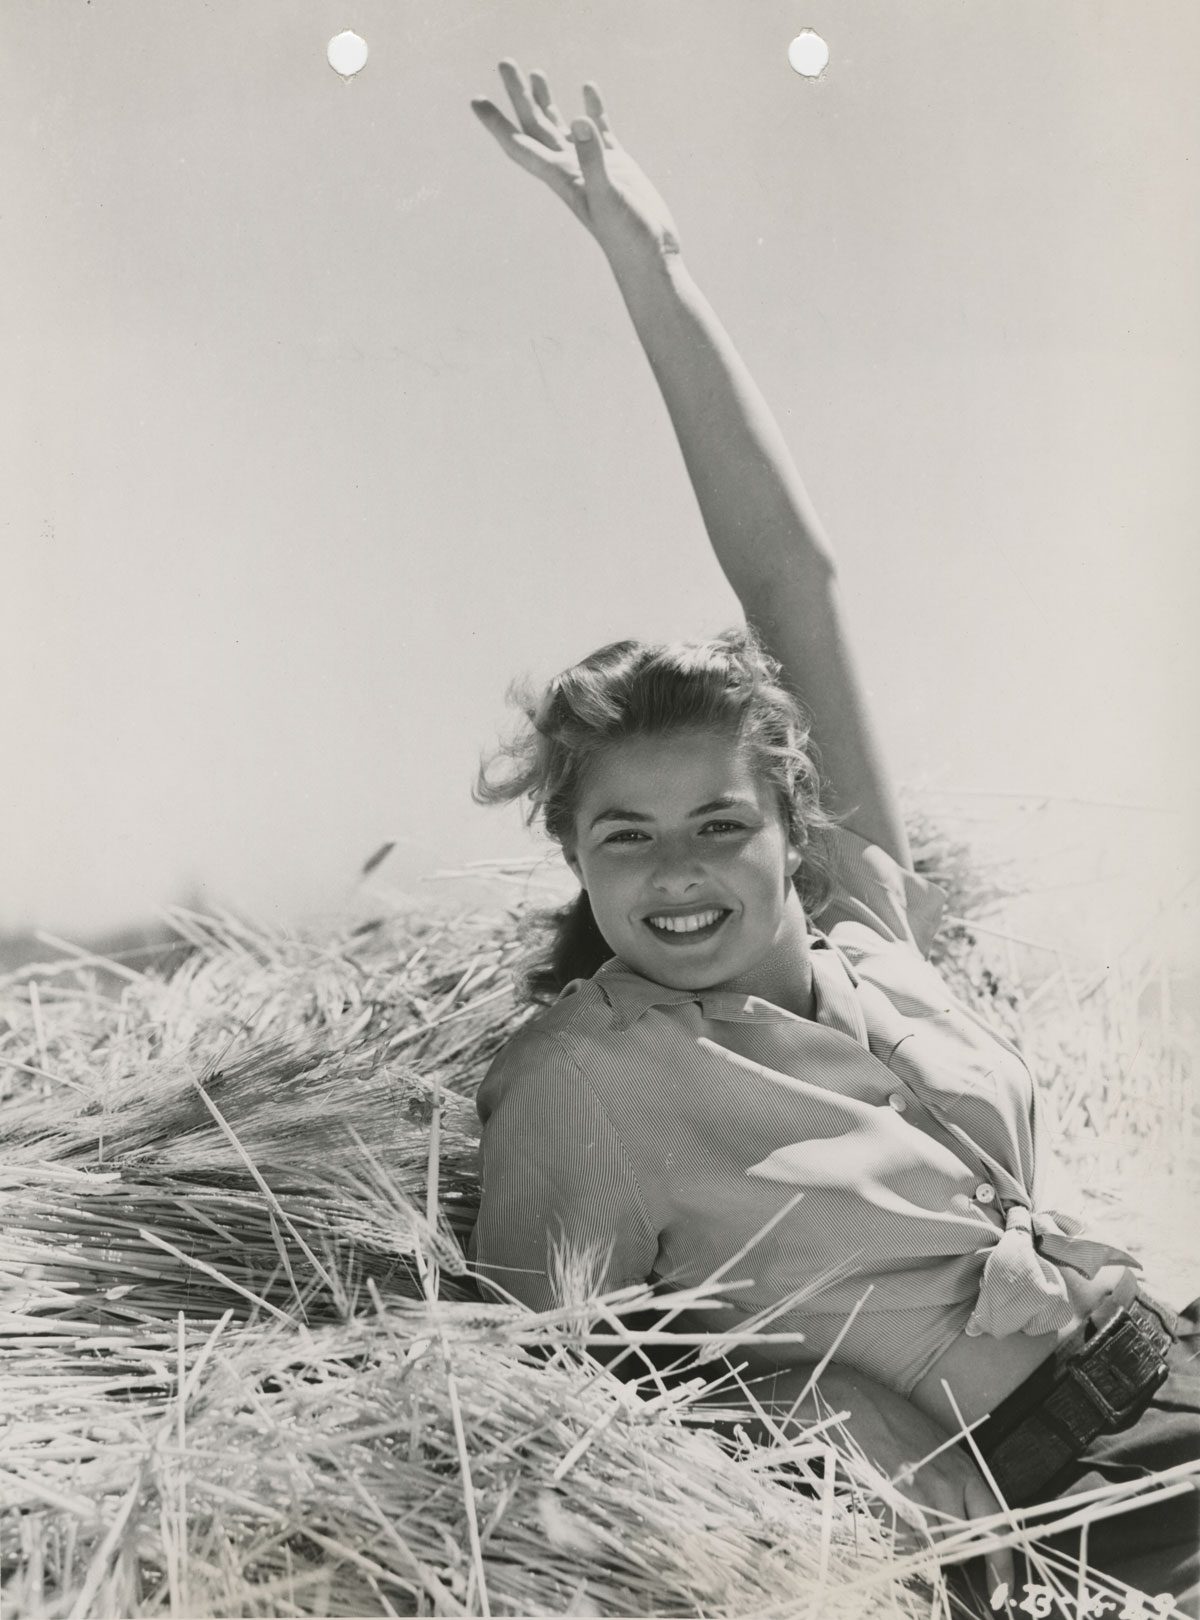 Ingrid Bergman in a publicity image for Intermezzo. From the David O. Selznick collection at the Harry Ransom Center.